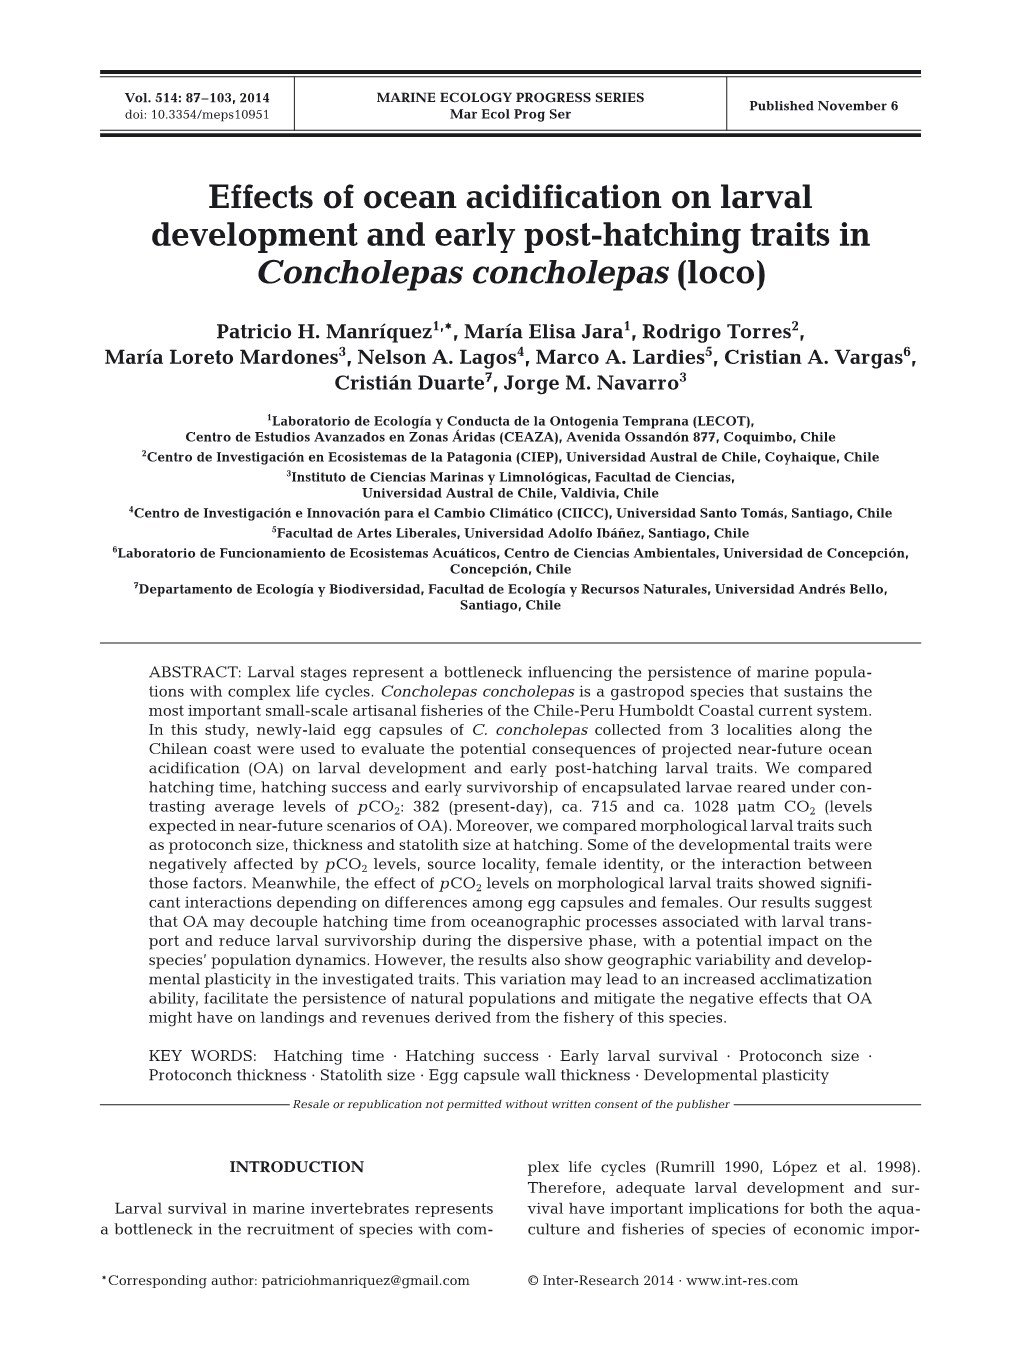 Effects of Ocean Acidification on Larval Development and Early Post-Hatching Traits in Concholepas Concholepas (Loco)